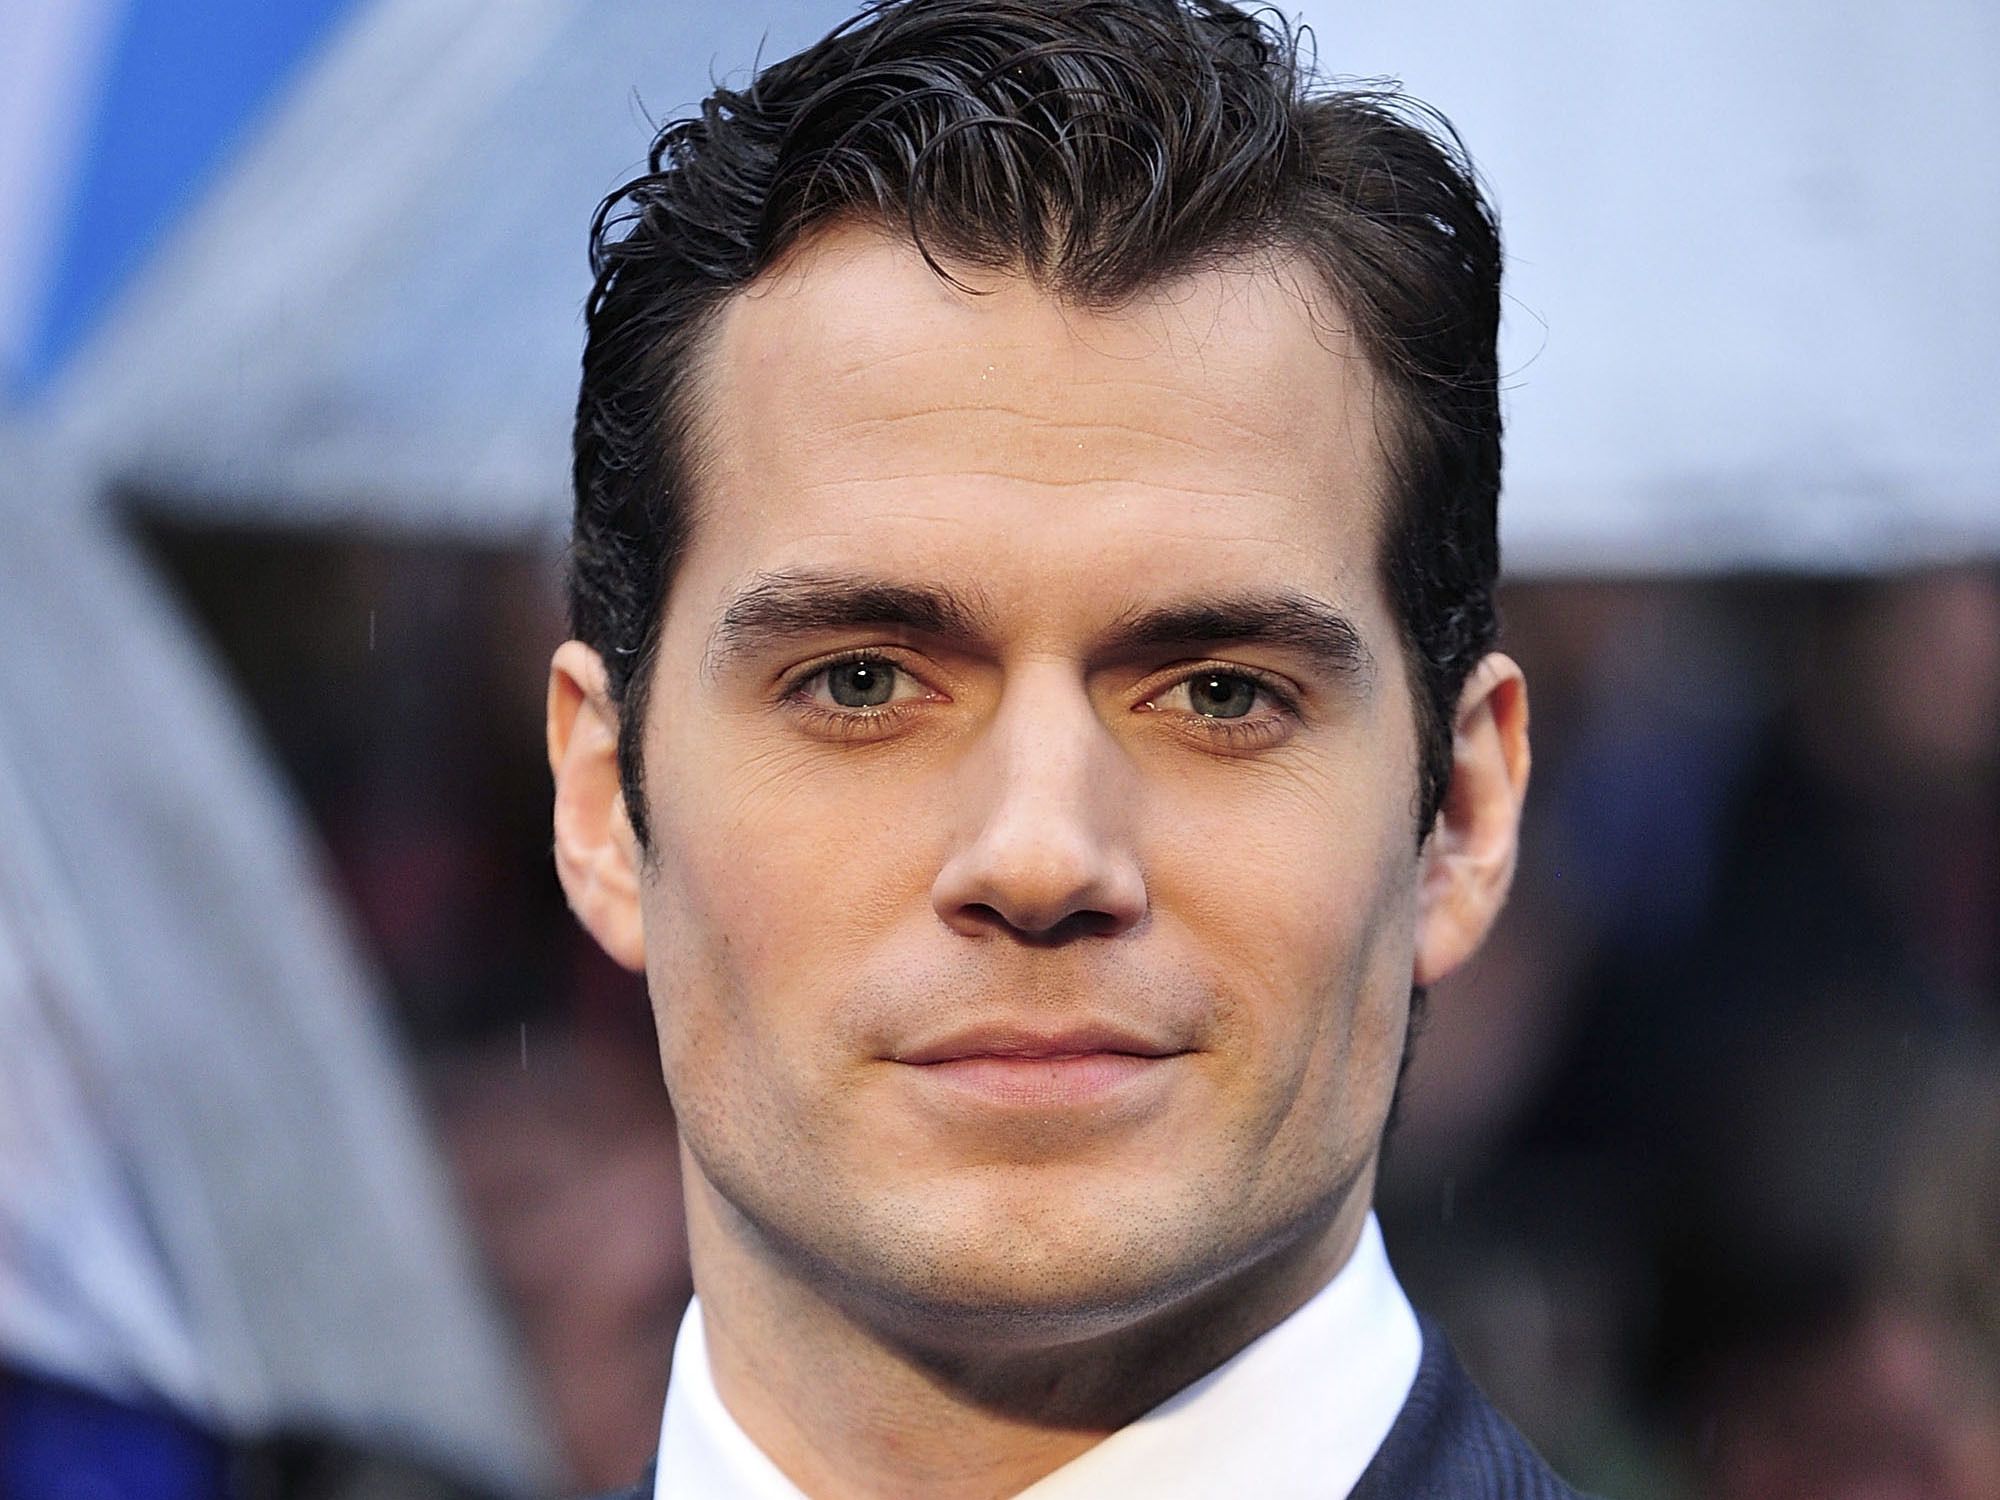 Henry Cavill has a perfect face | Male Celeb News